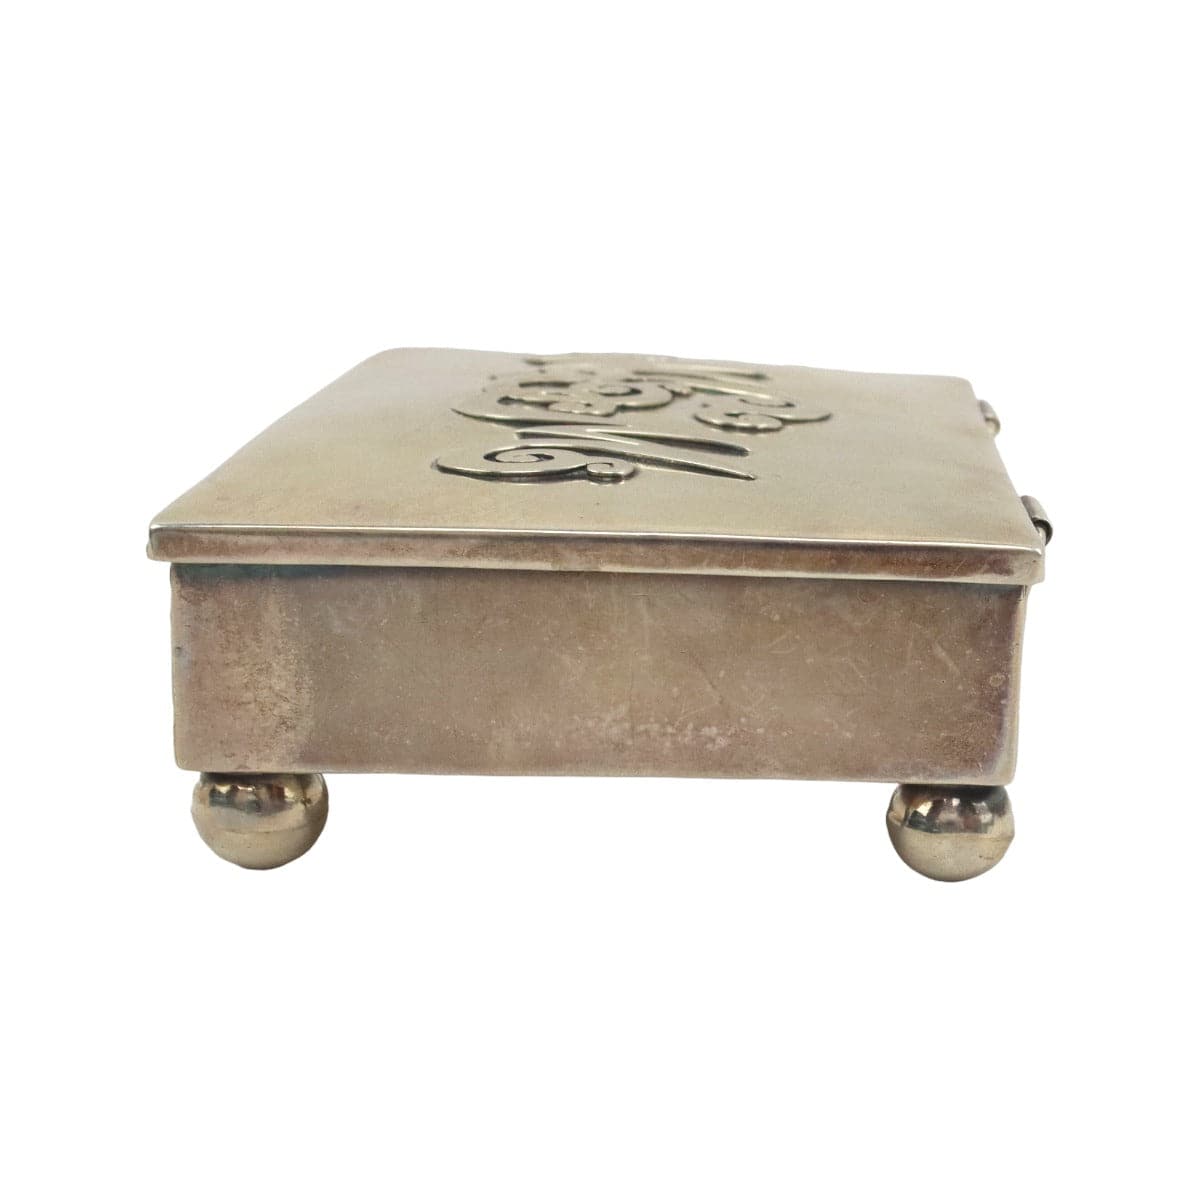 Frank Patania Sr. (1898-1964) - Sterling Silver Lidded Box with "MCM" Initials c. 1950s, 1.5" x 5.5" x 3.75" (J91699-1022-014) 5